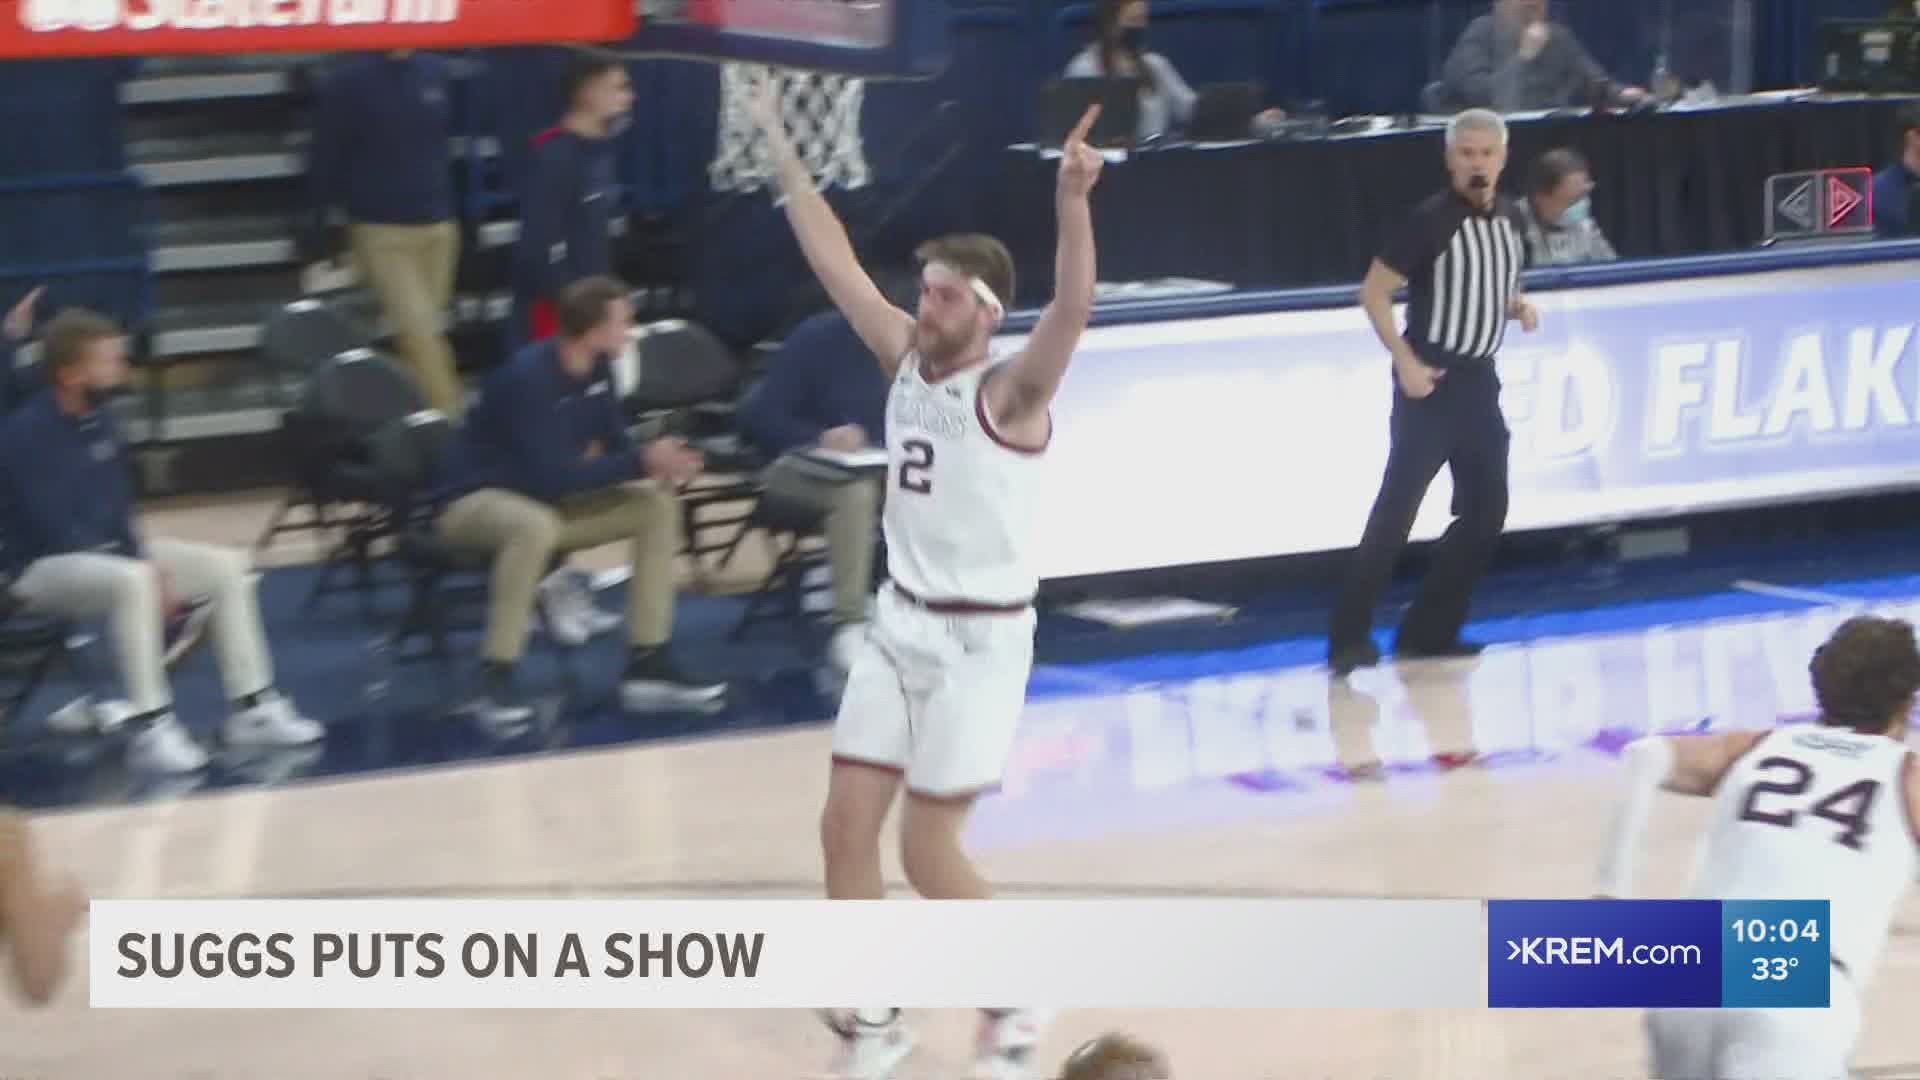 Gonzaga clinched an undefeated regular season with their win over Loyola Marymount University Saturday night.